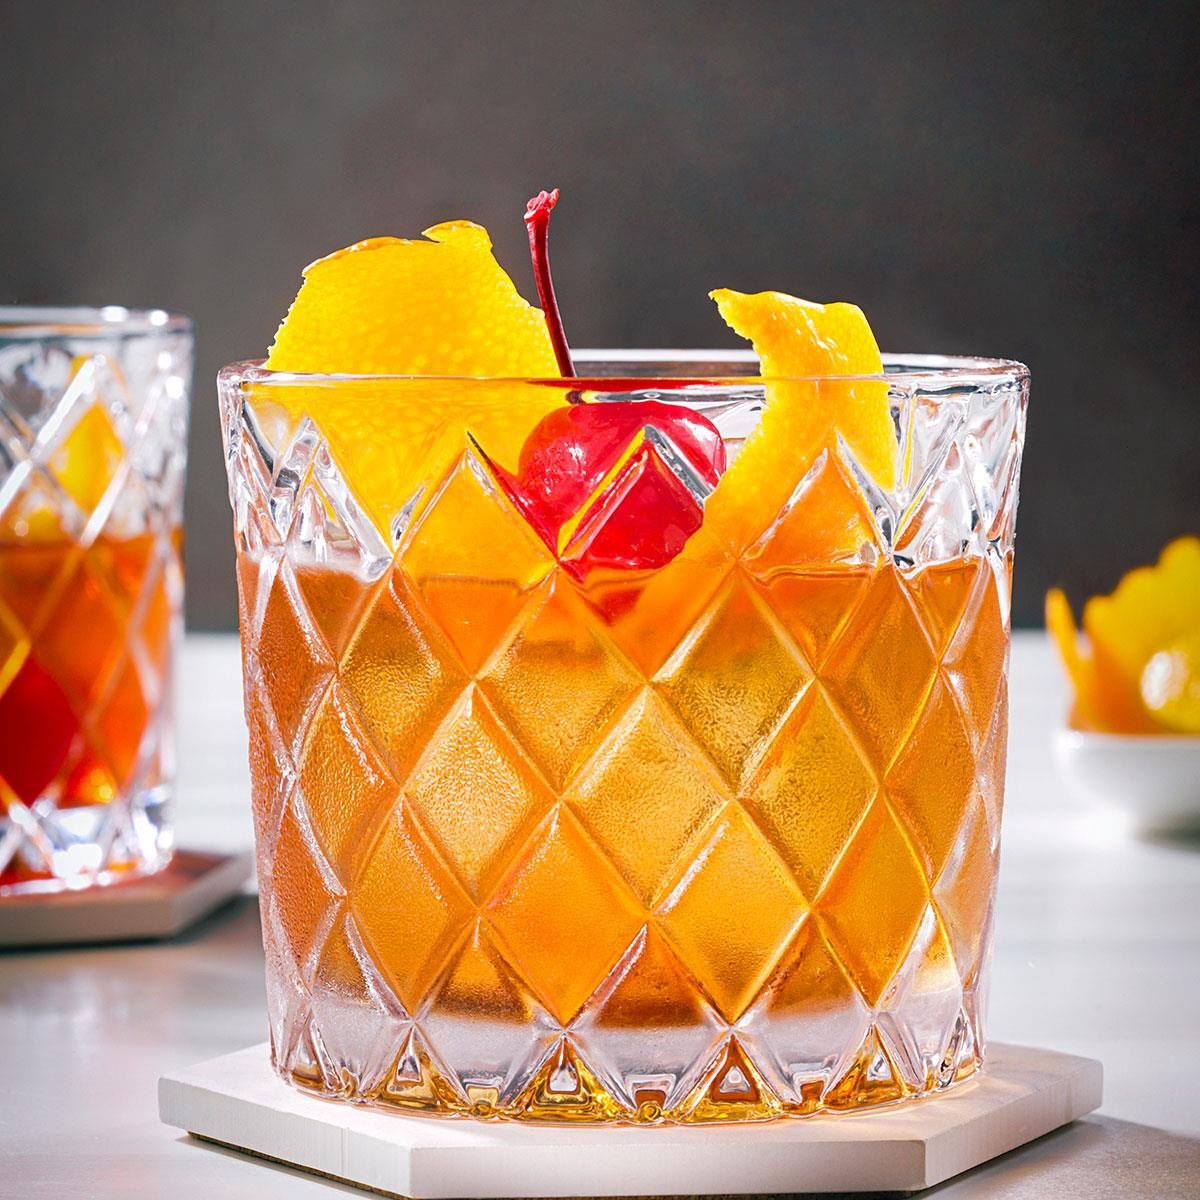 Maple Old-Fashioned